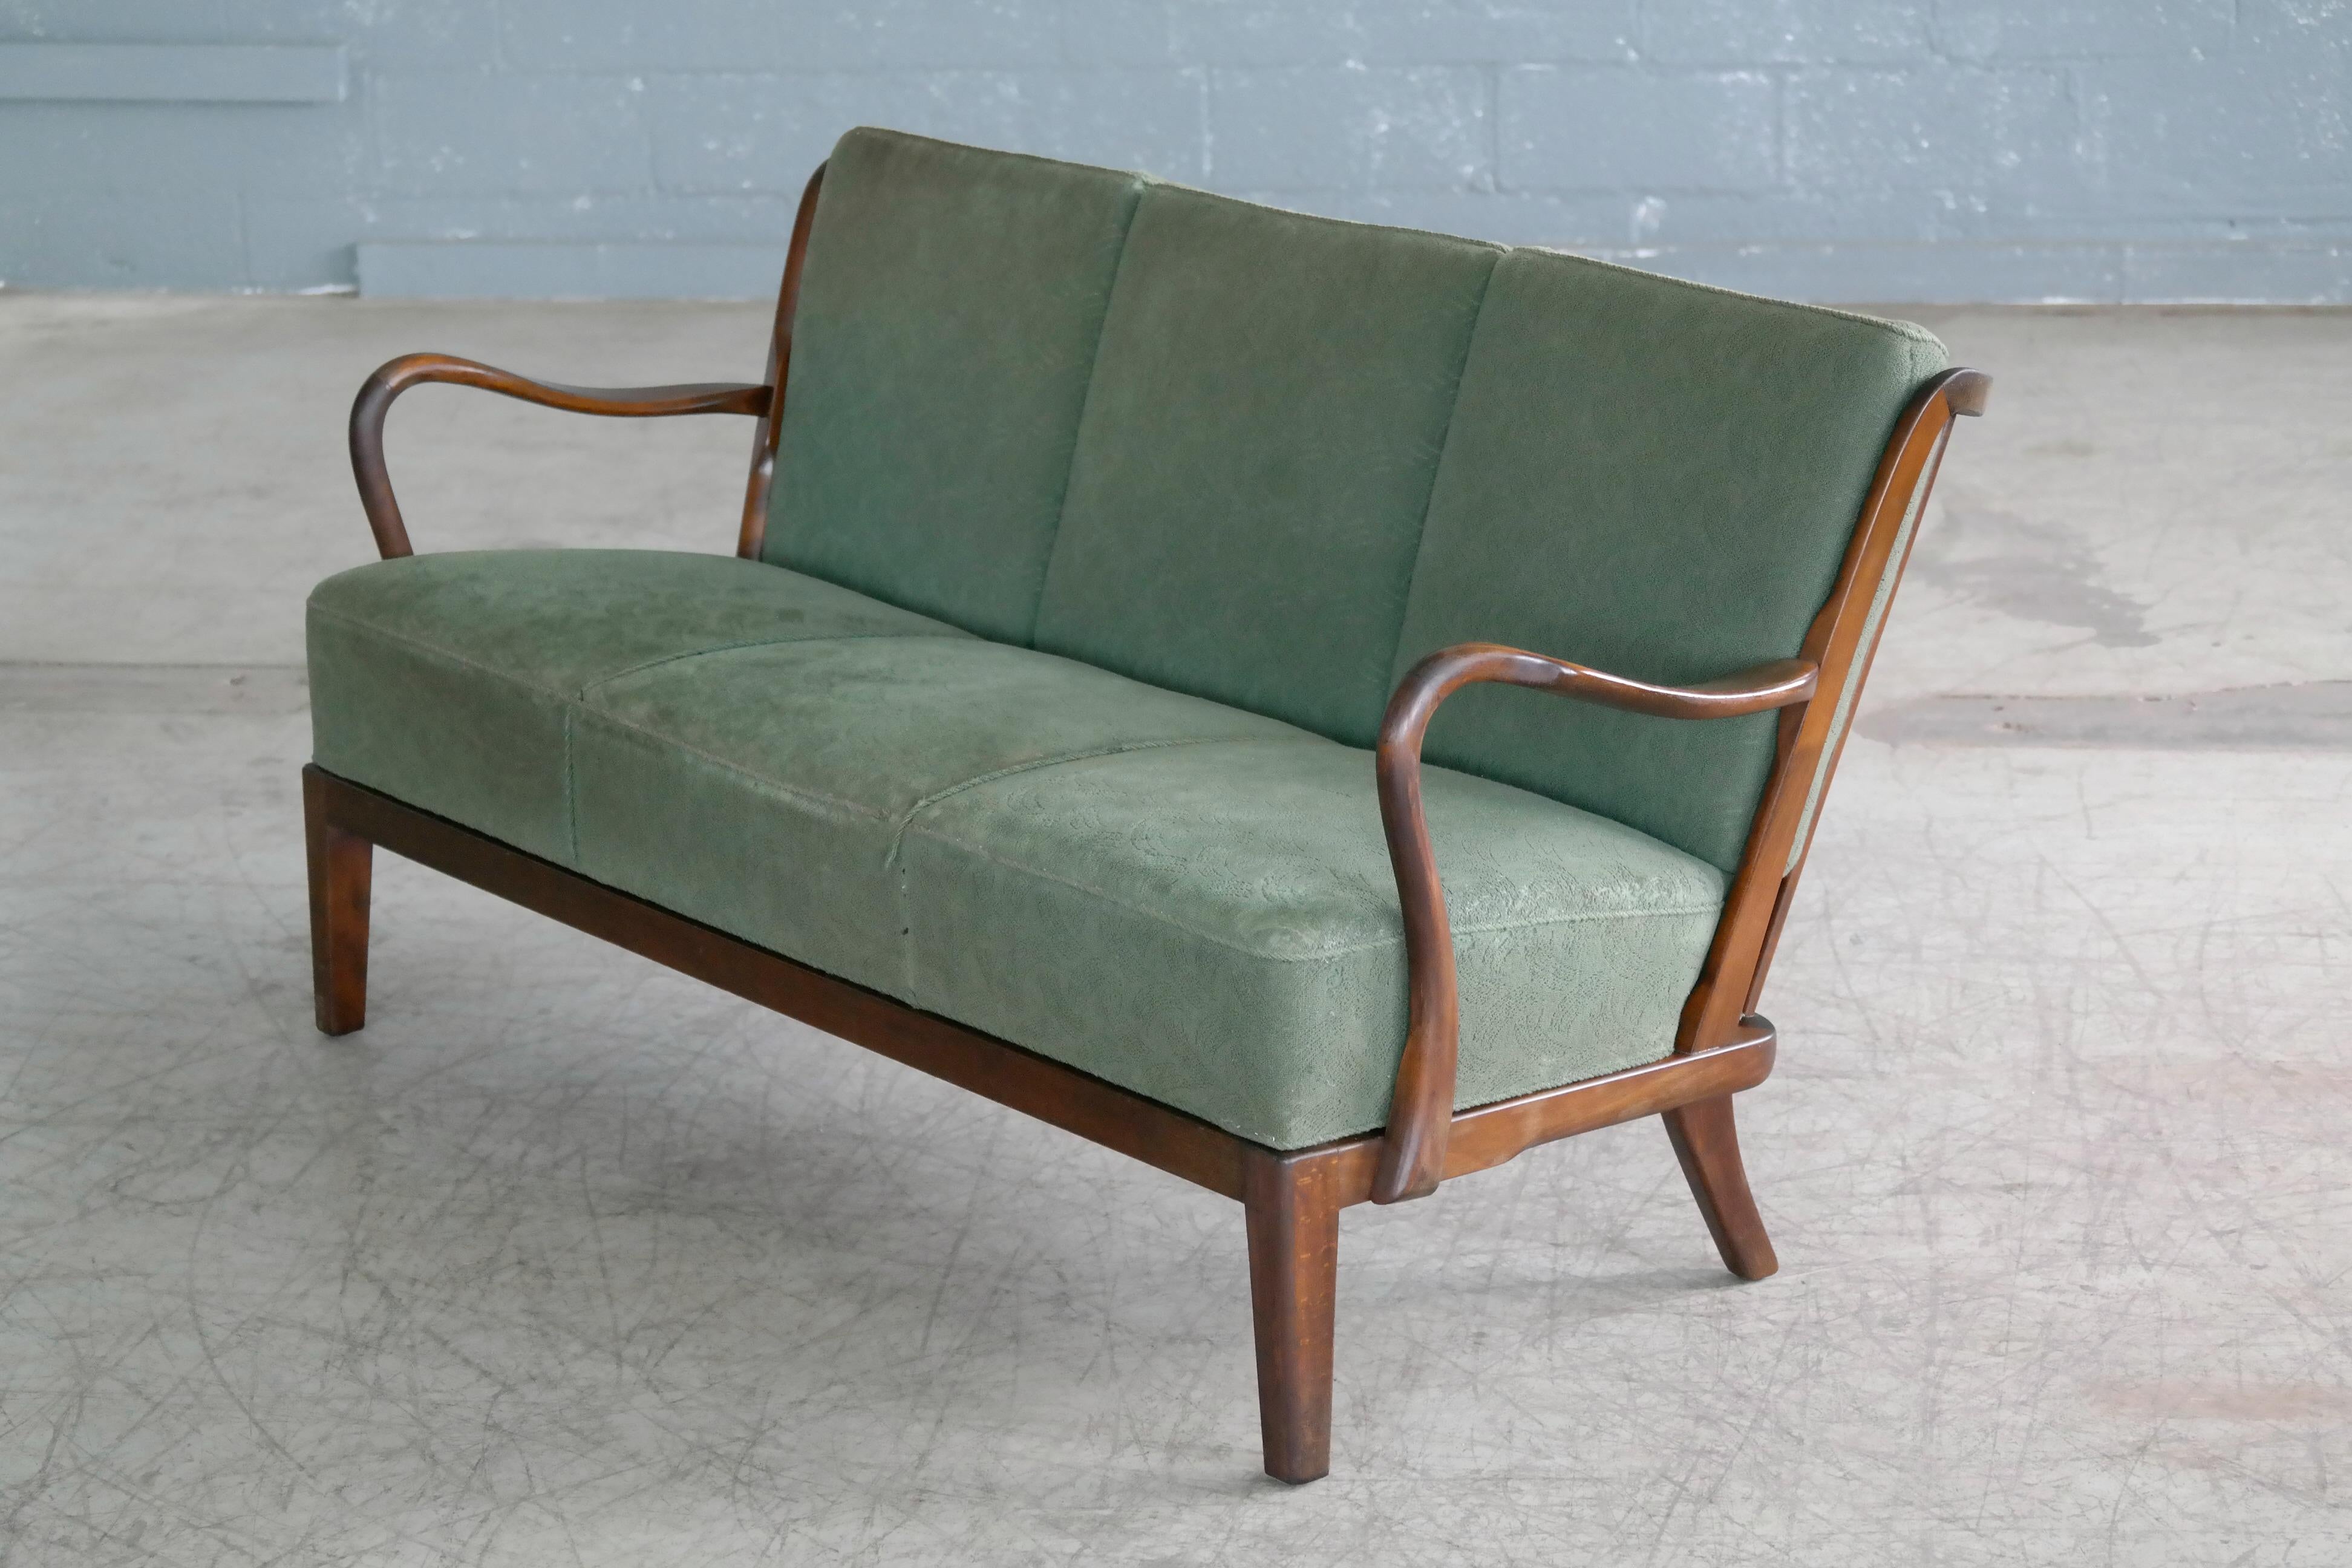 Stained Danish Midcentury Open Arm Spindle Back Sofa Model 95 by Slagelse